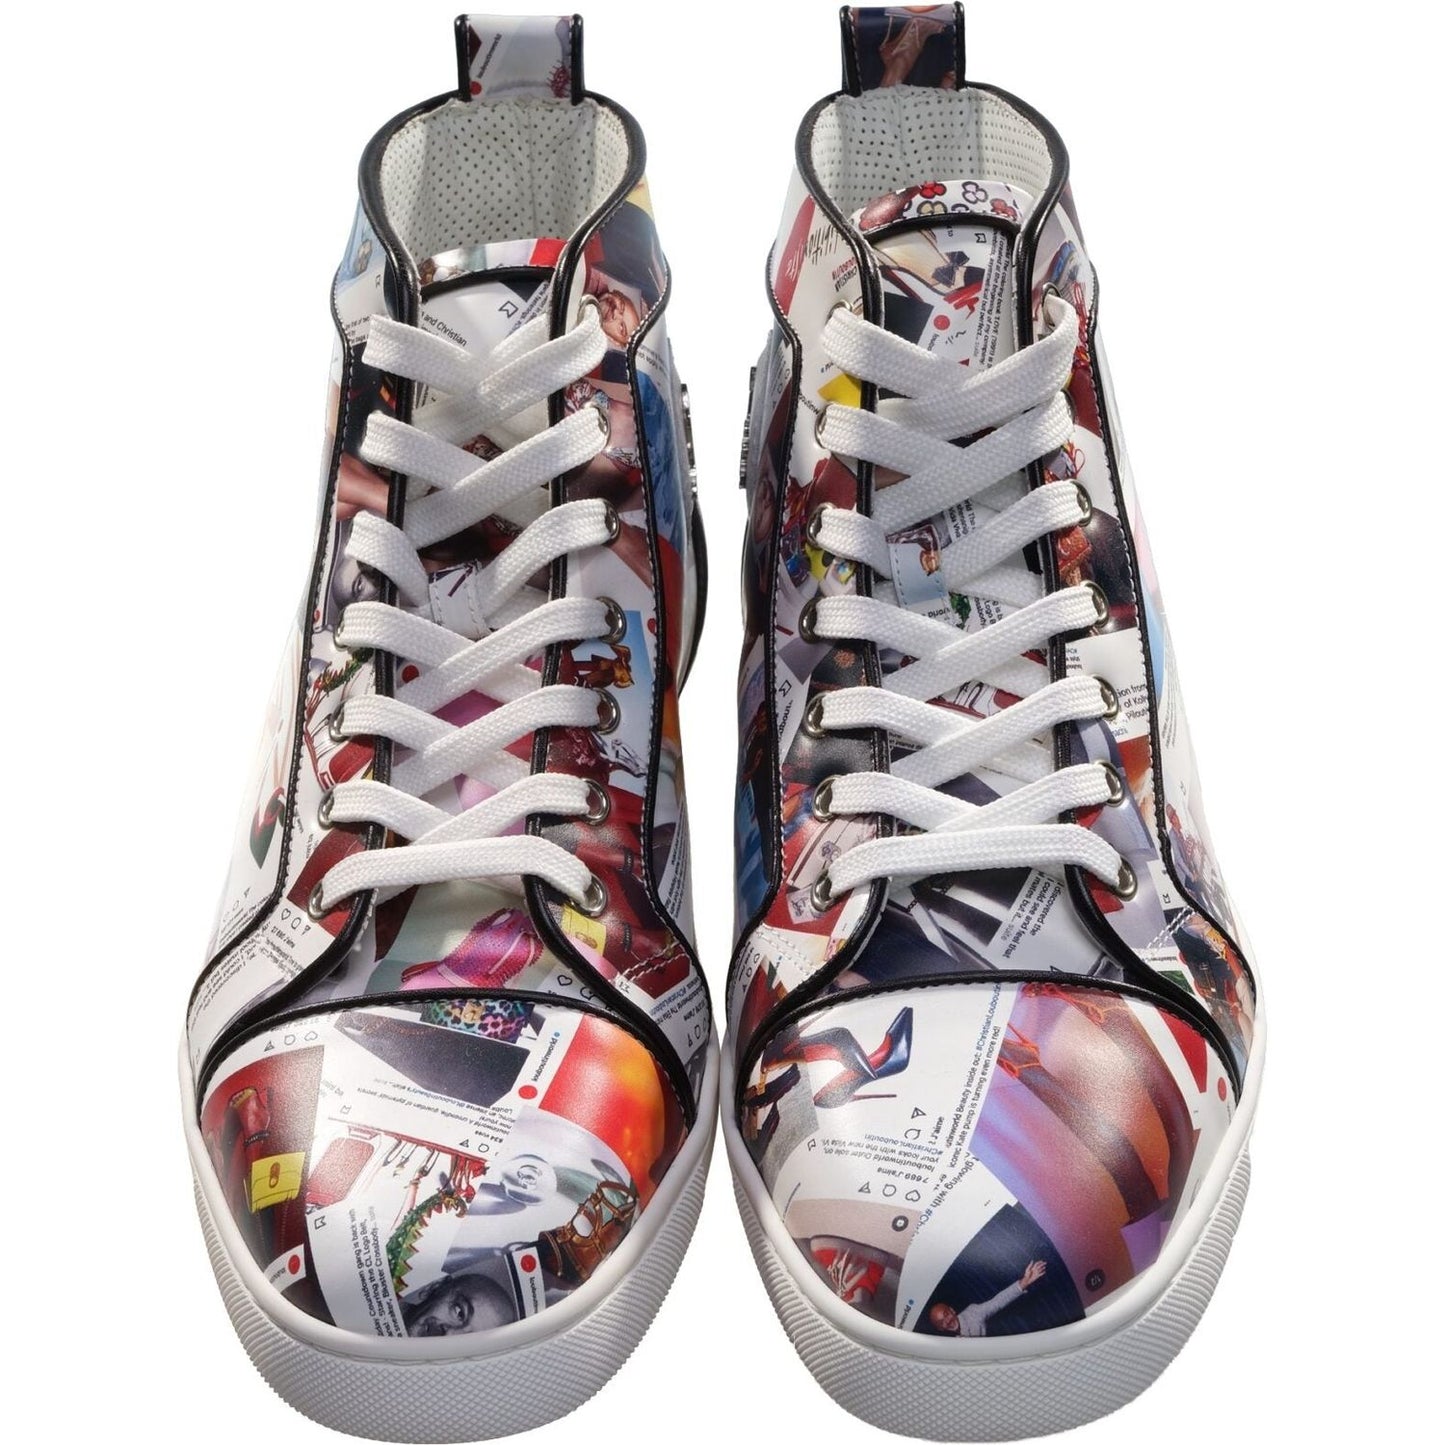 Louis Orlato Flat Leather Printed High Top Sneakers